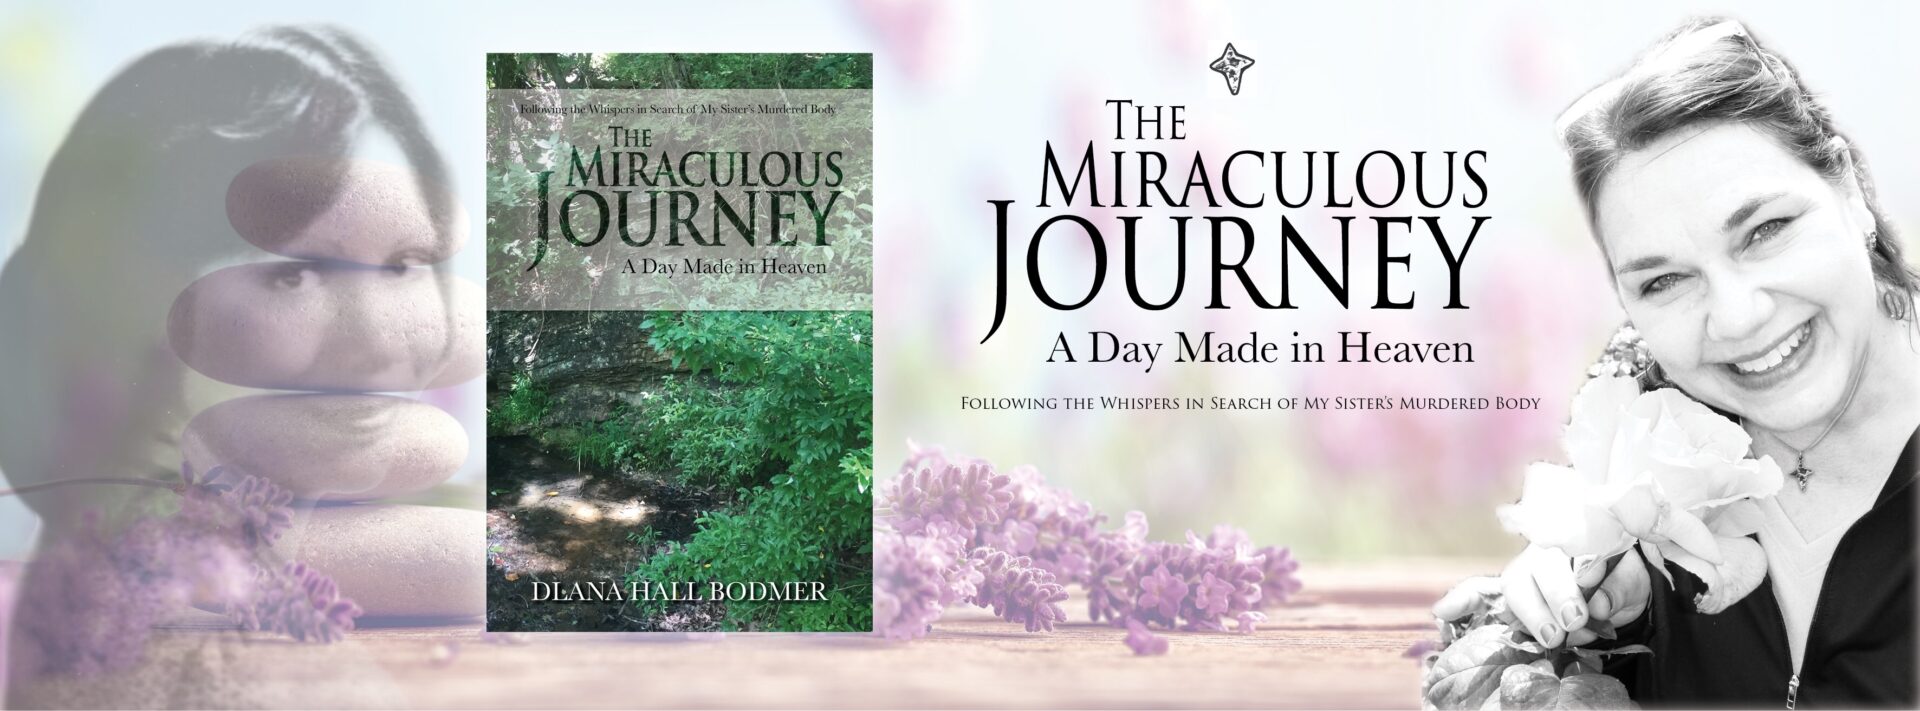 The Miraculous Journey